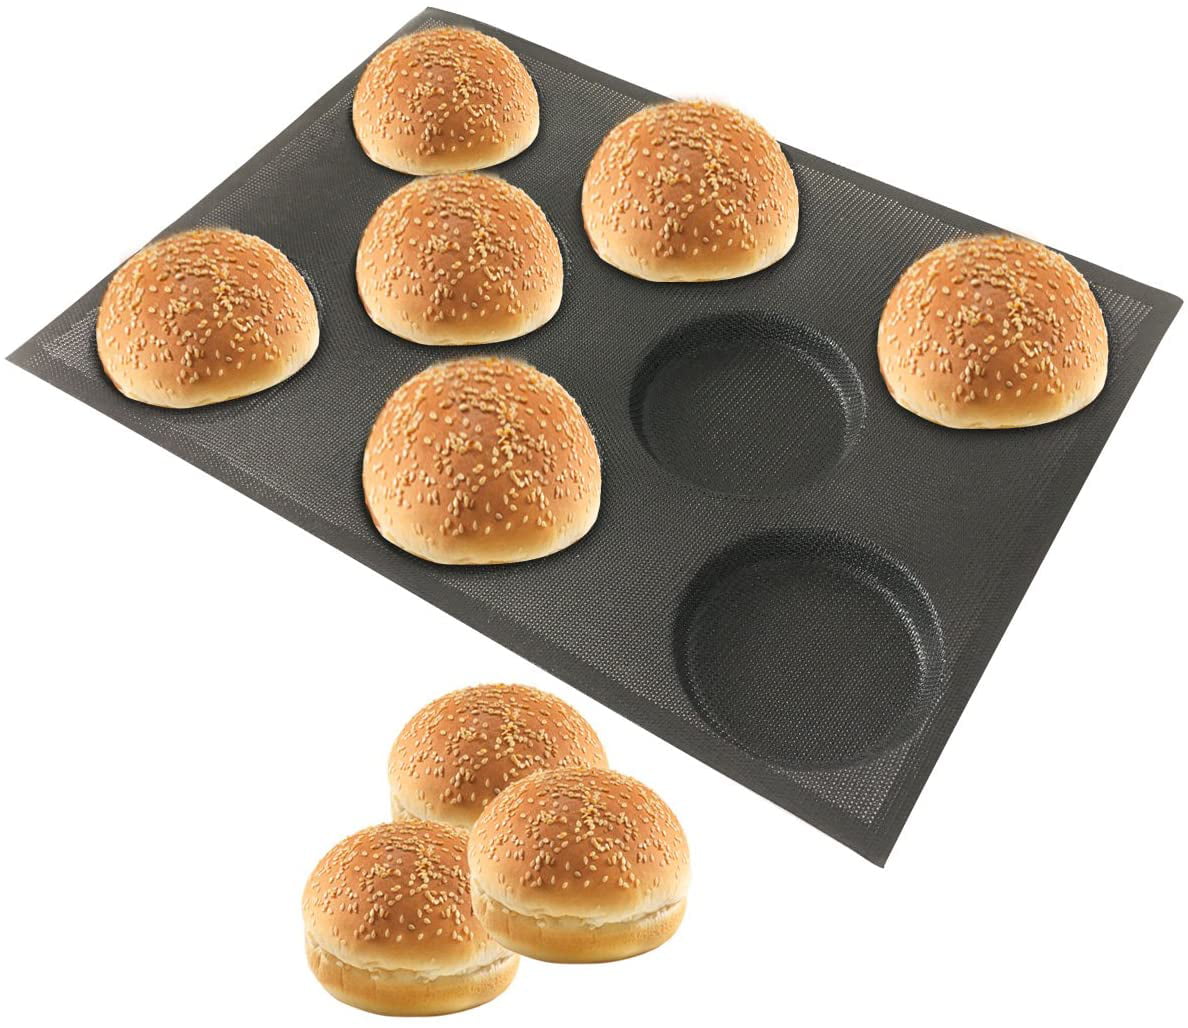 BLACK Silicone Hamburger Bread 3 Grid Small Toaster Oven Perforated Bakery Molds Non Stick Bakeware Baking Sheets Fit Half Pan Siz